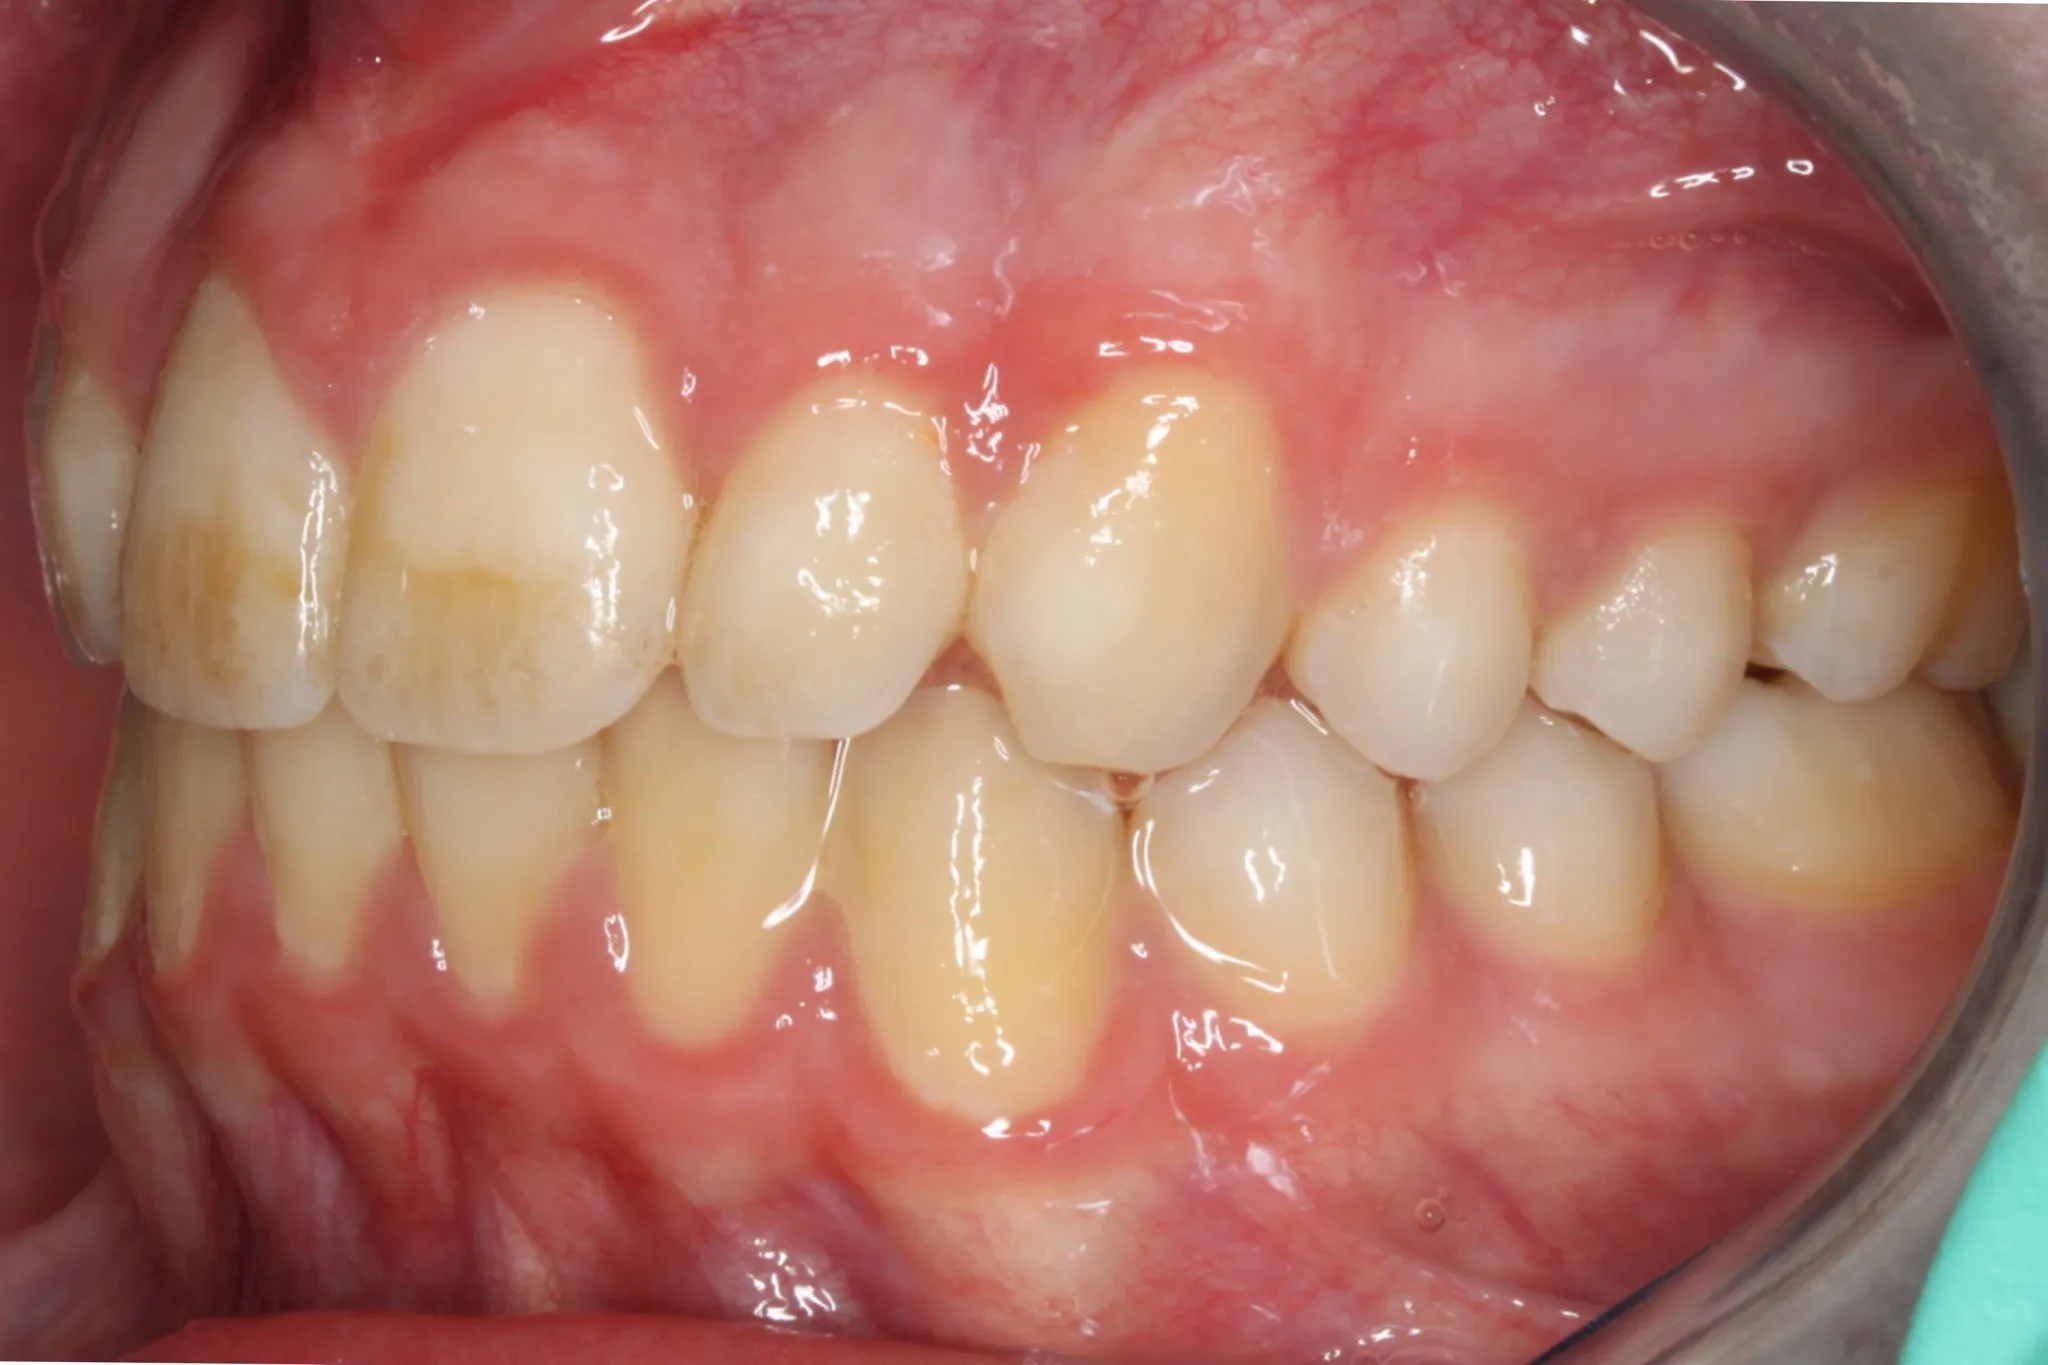 After photo (right side view of teeth): Dental Expanders & Braces for Severe Crowding, Case Study #1